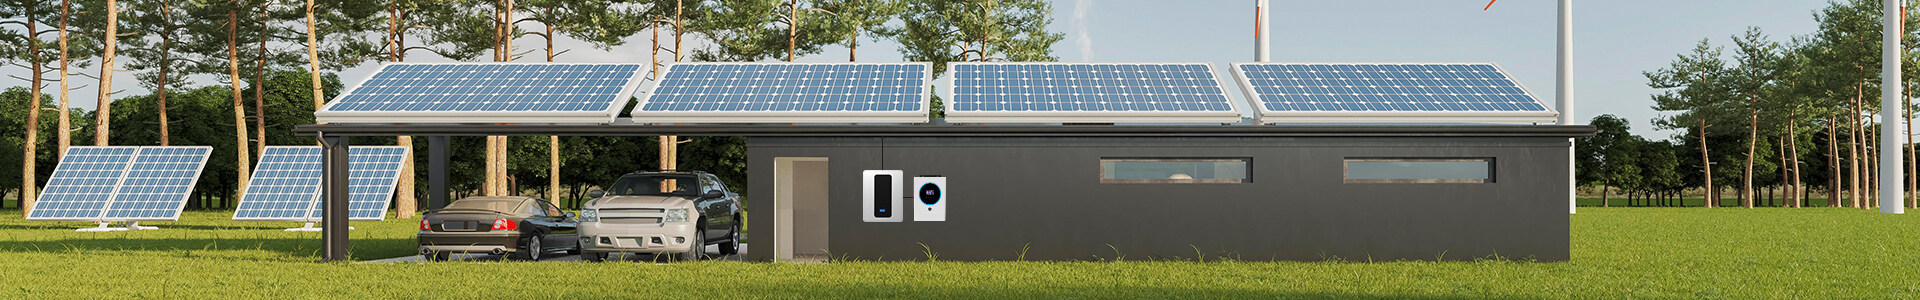 $Home solar batteries$$Purchasing solar batteries$$Solar battery manufacturers$$Choosing the right solar battery$$Capacity of solar batteries$$Charging and discharging power of solar batteries$$Types of solar batteries (AC vs. DC)$$Solar battery chemistry$$PV system energy storage$$Energy savings with solar batteries$